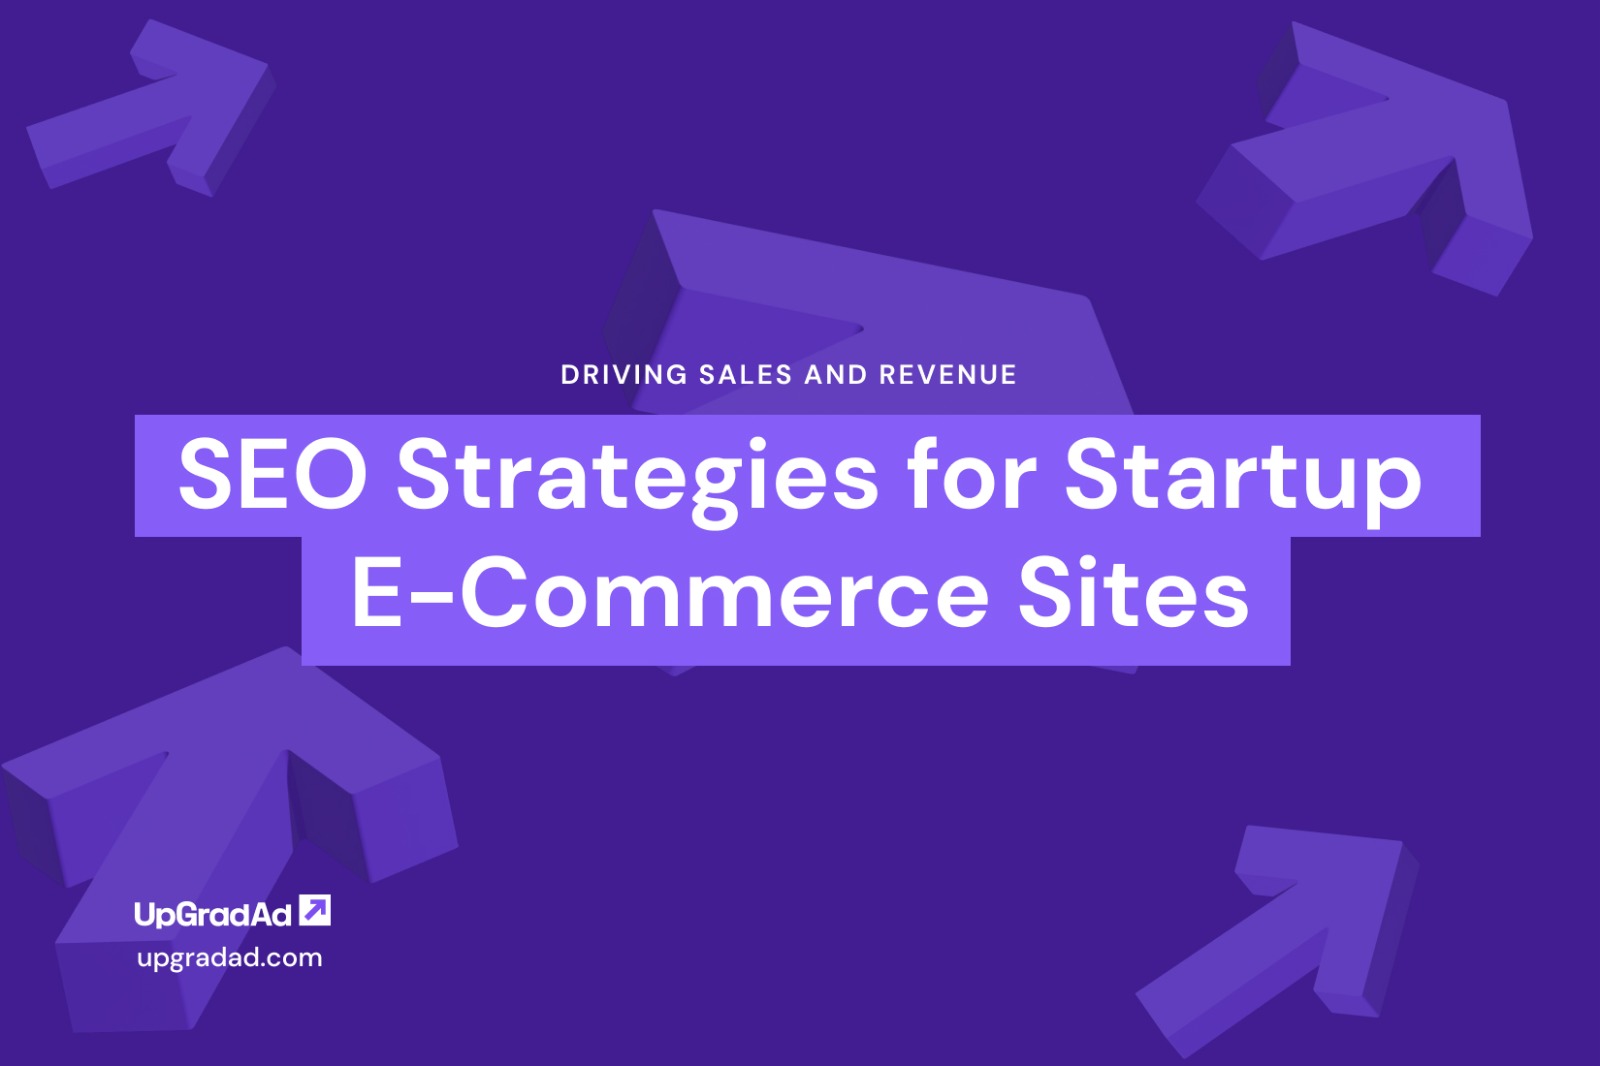 SEO Strategies for Startup E-Commerce Sites: Driving Sales and Revenue